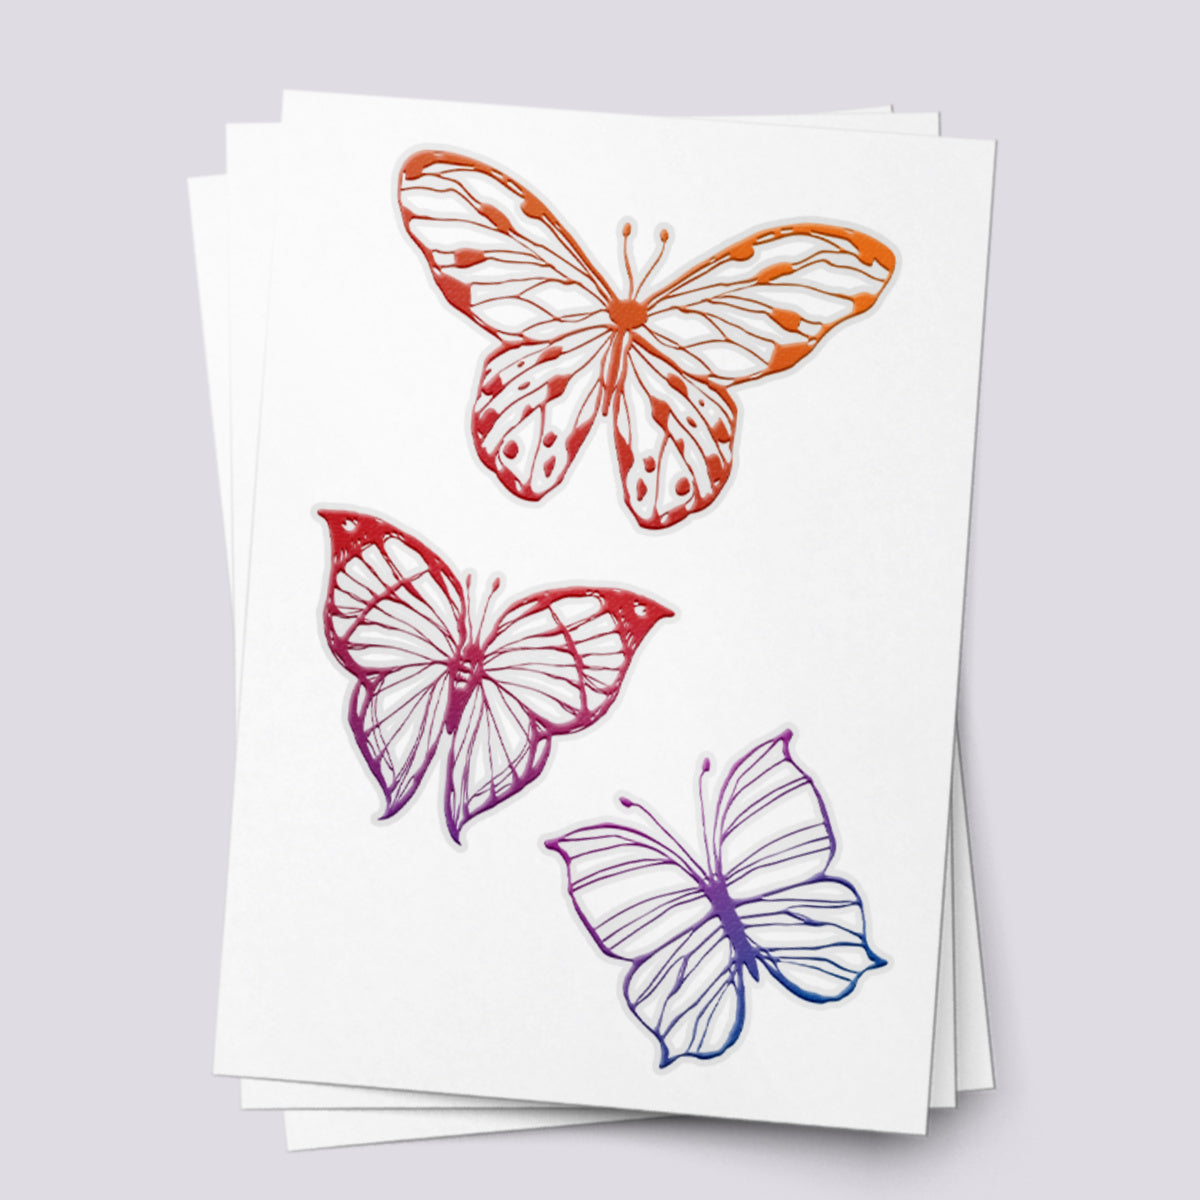 Vibrant Rainbow Butterflies Temporary Tattoos - Colorful Party Fun